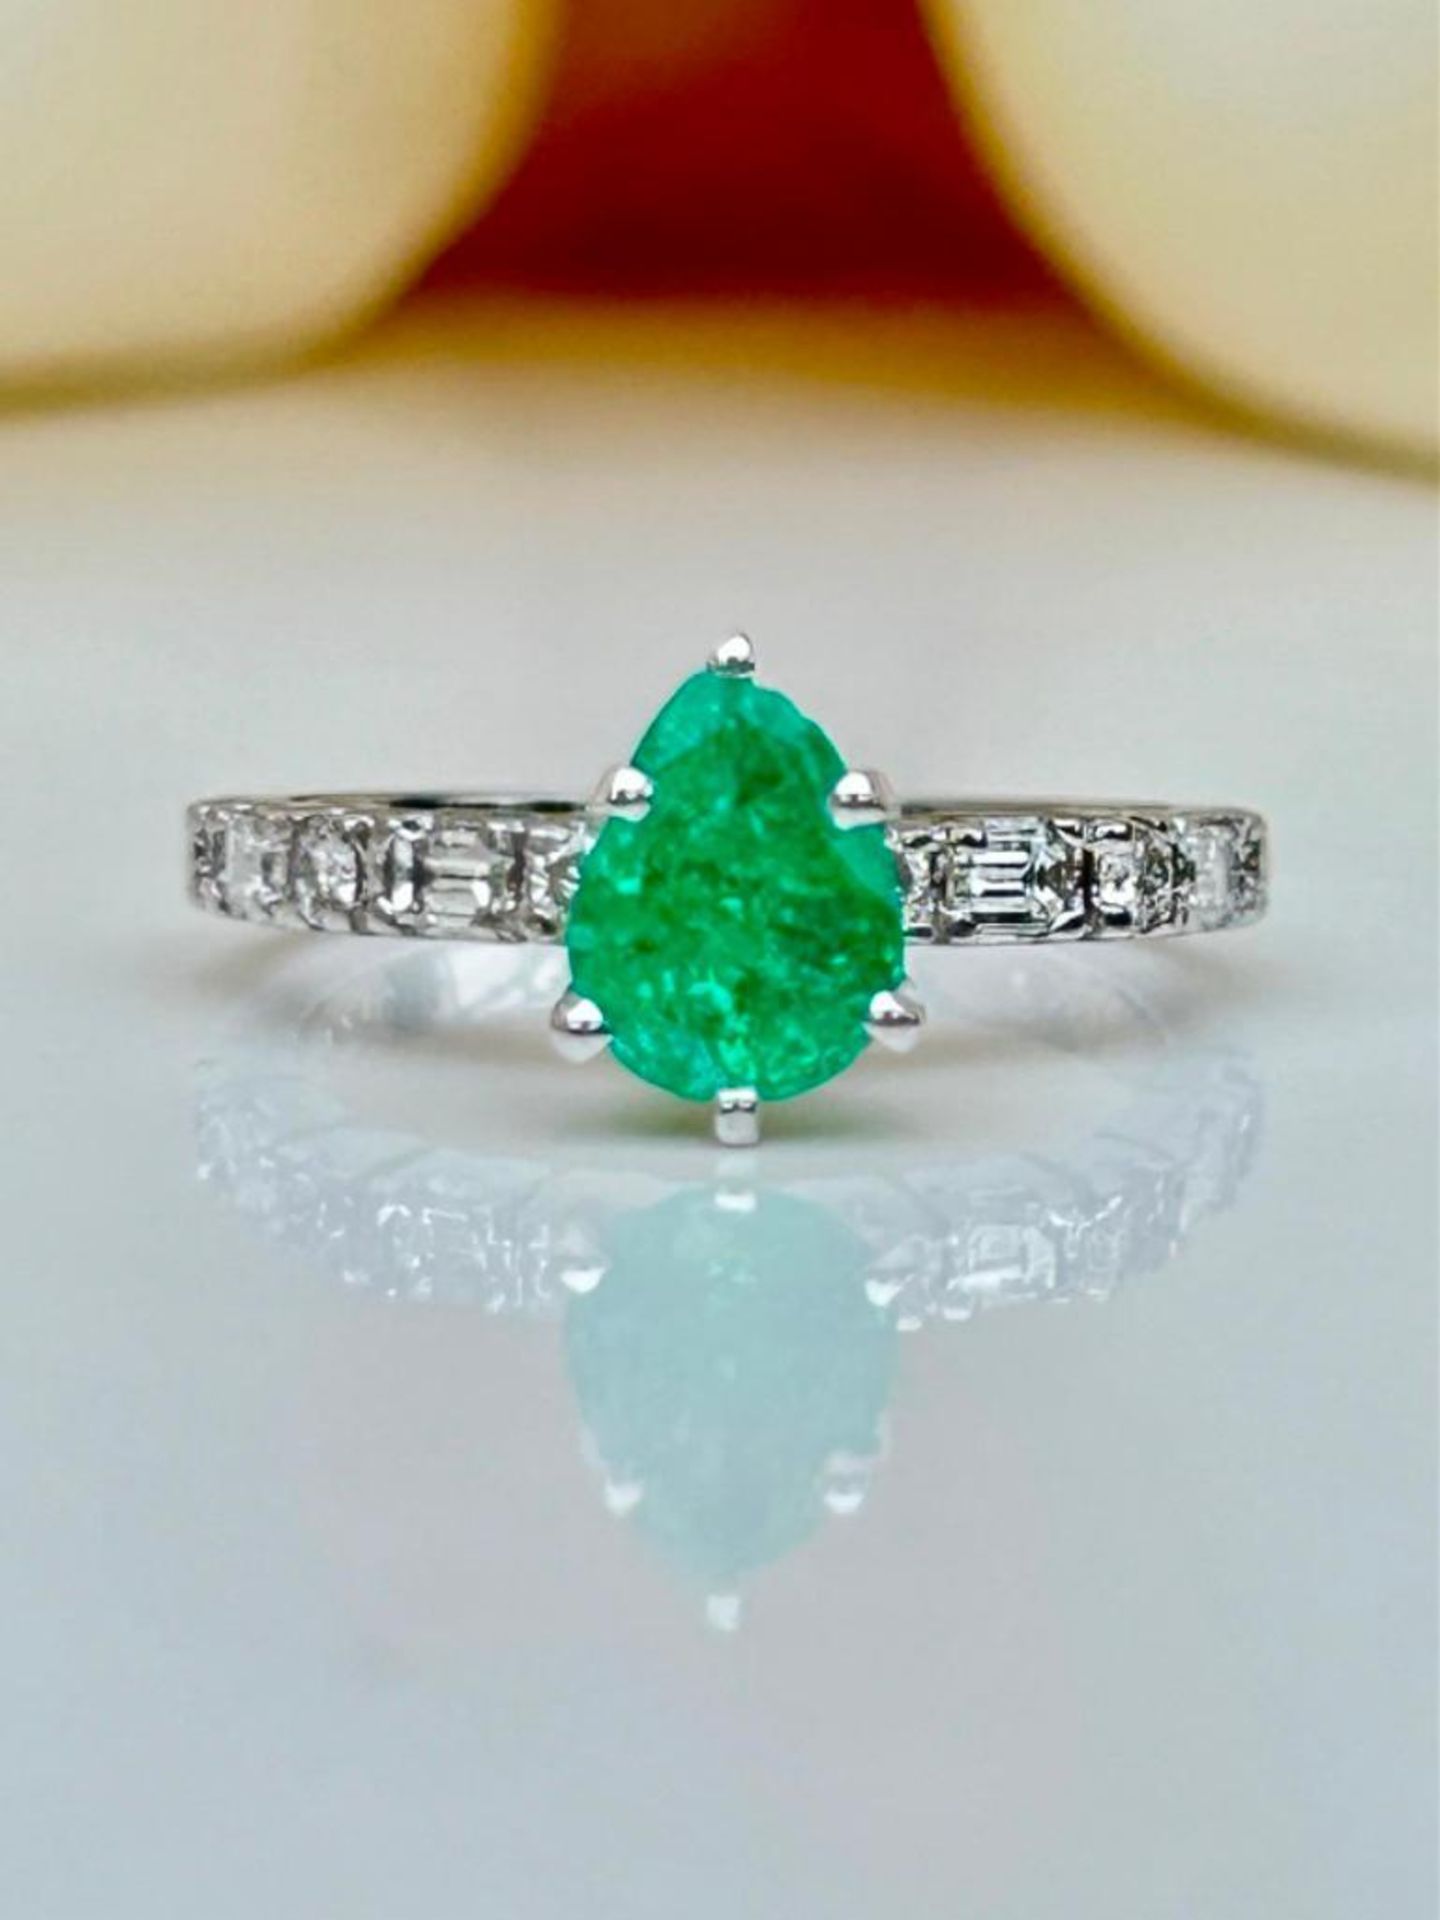 Outstanding 14k White Gold Emerald and Diamond Ring